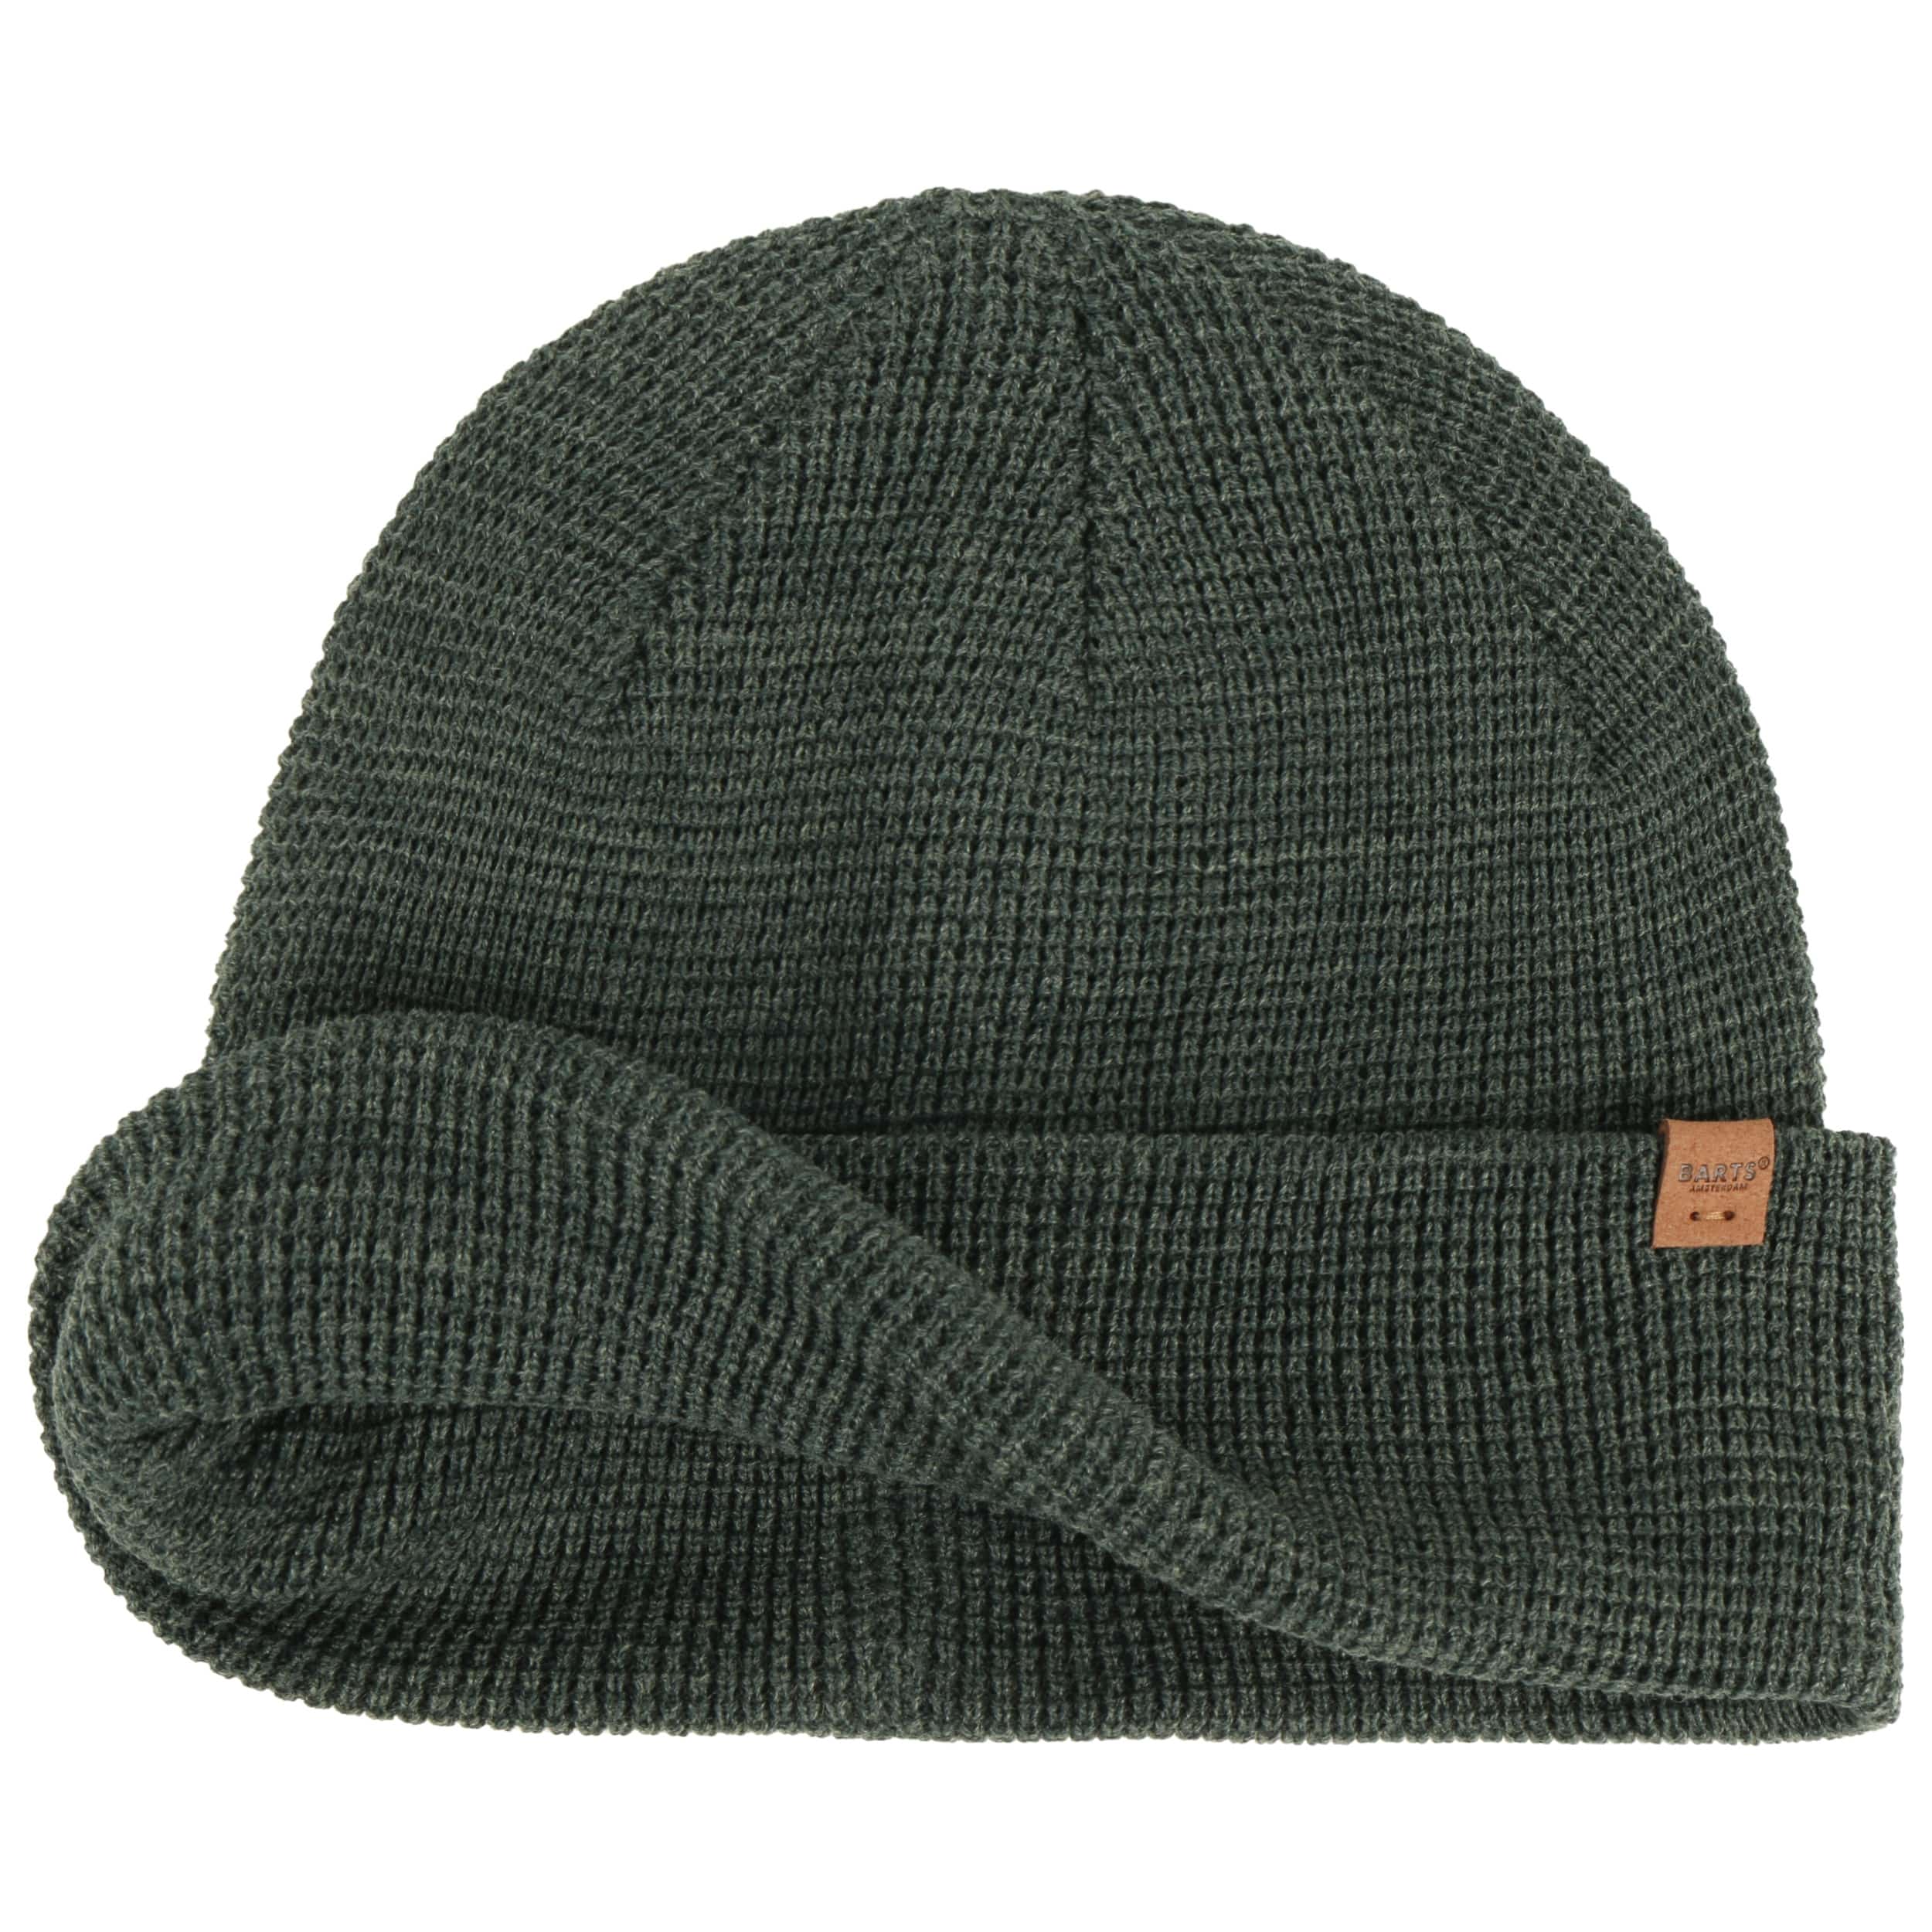 by Coler 22,95 £ Hat - Beanie Barts